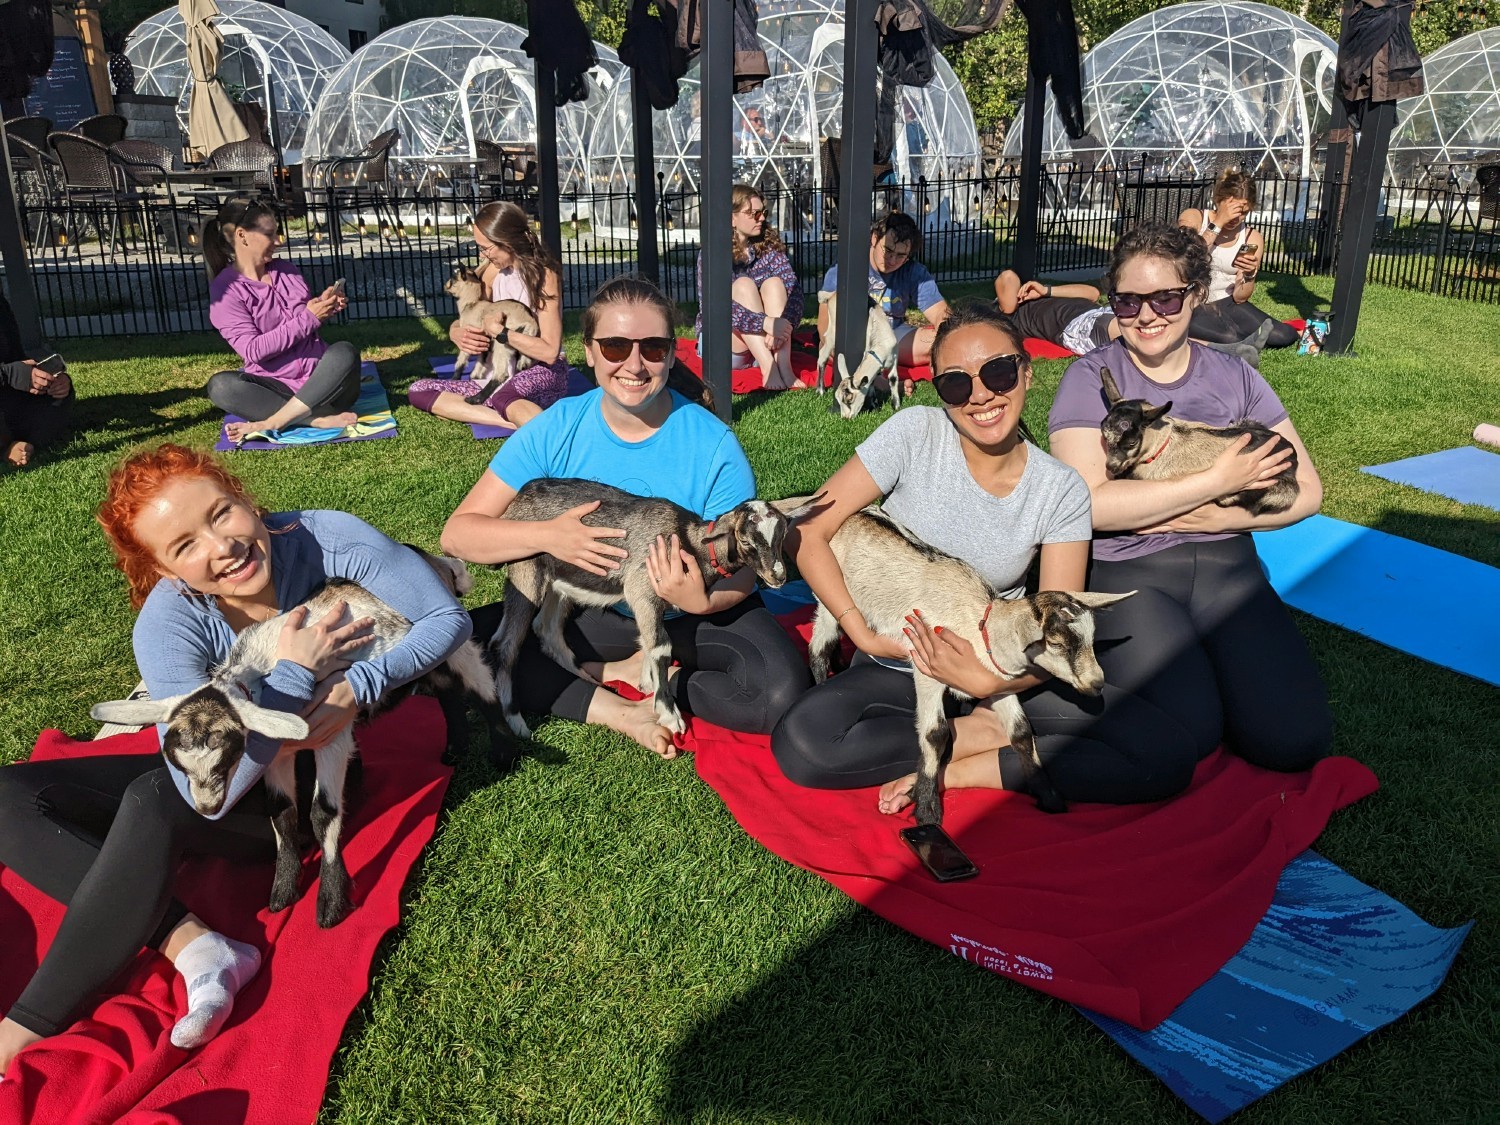 Nothing like goat yoga for a summer wellness event.